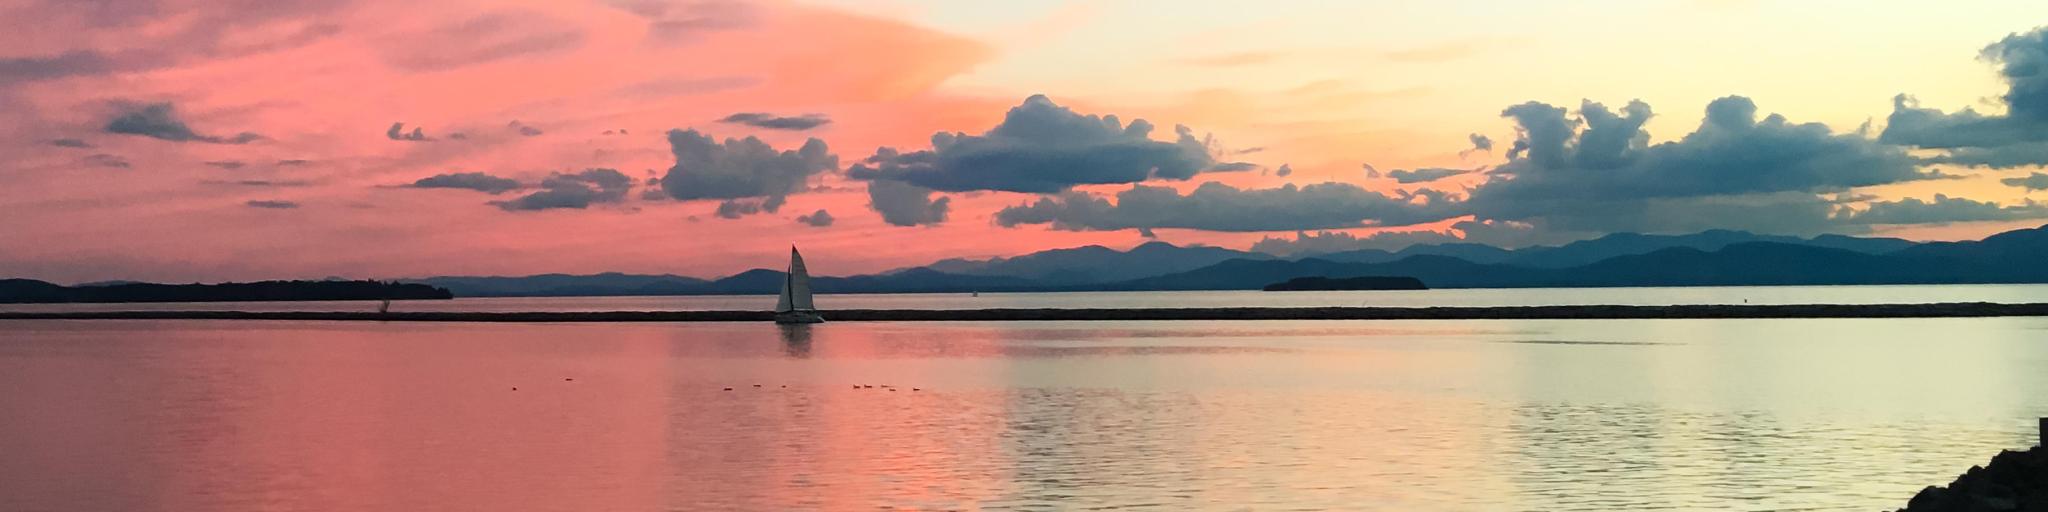 Lake Champlain in Burlington, Vermont, USA with a sailboat at sunset on Lake Champlain in Burlington, Vermont. The vibrant pink sky transitions to a cool blue in both the sky and the water.